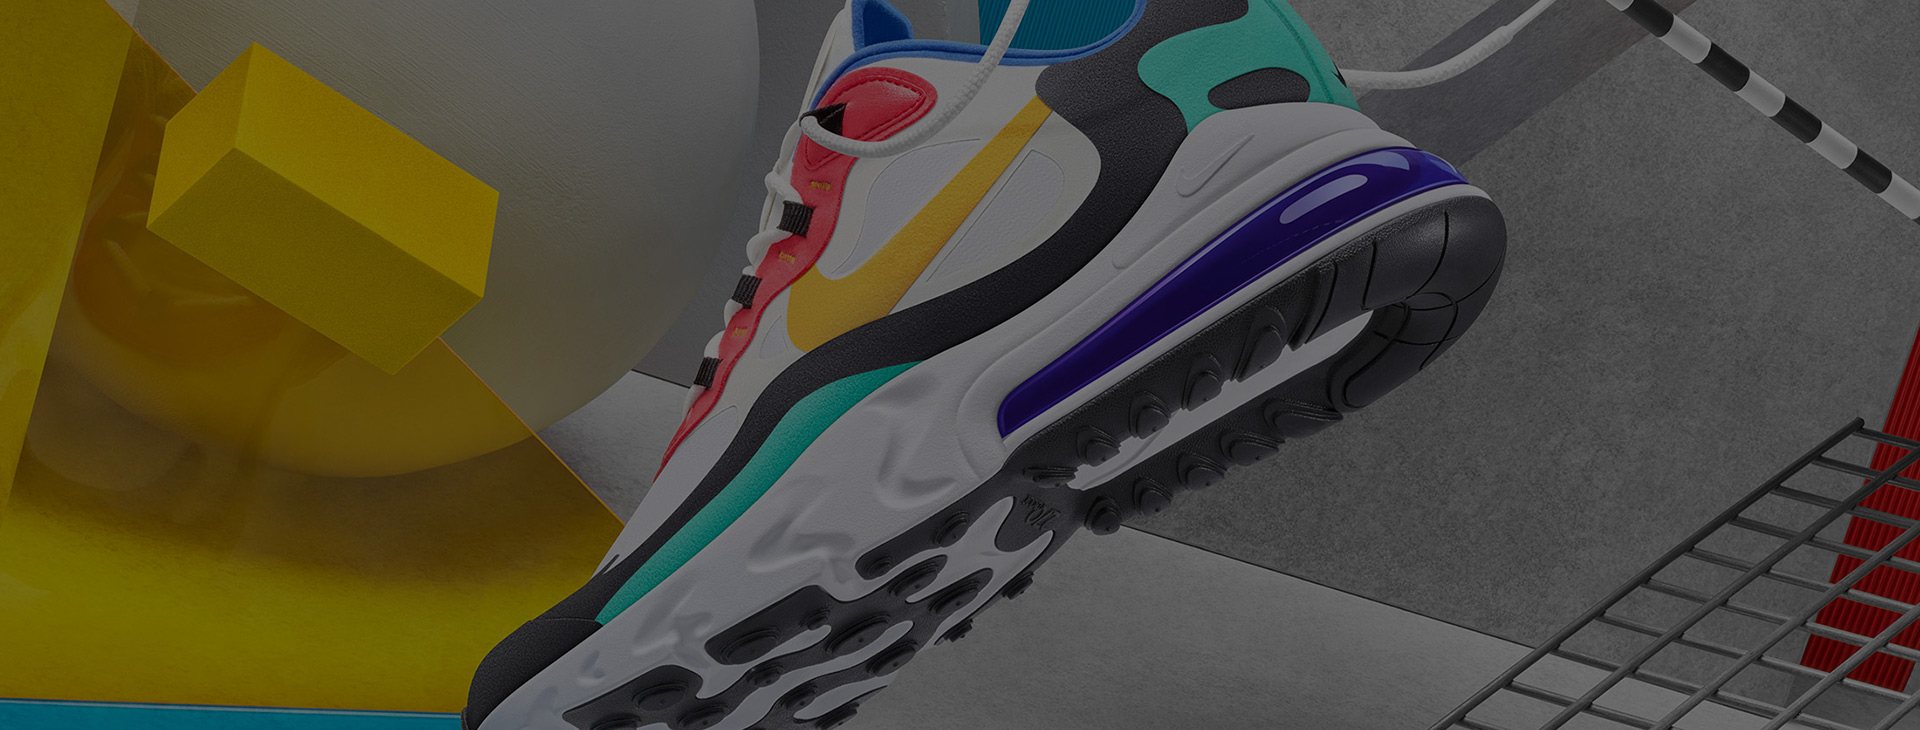 when did nike 270 react come out